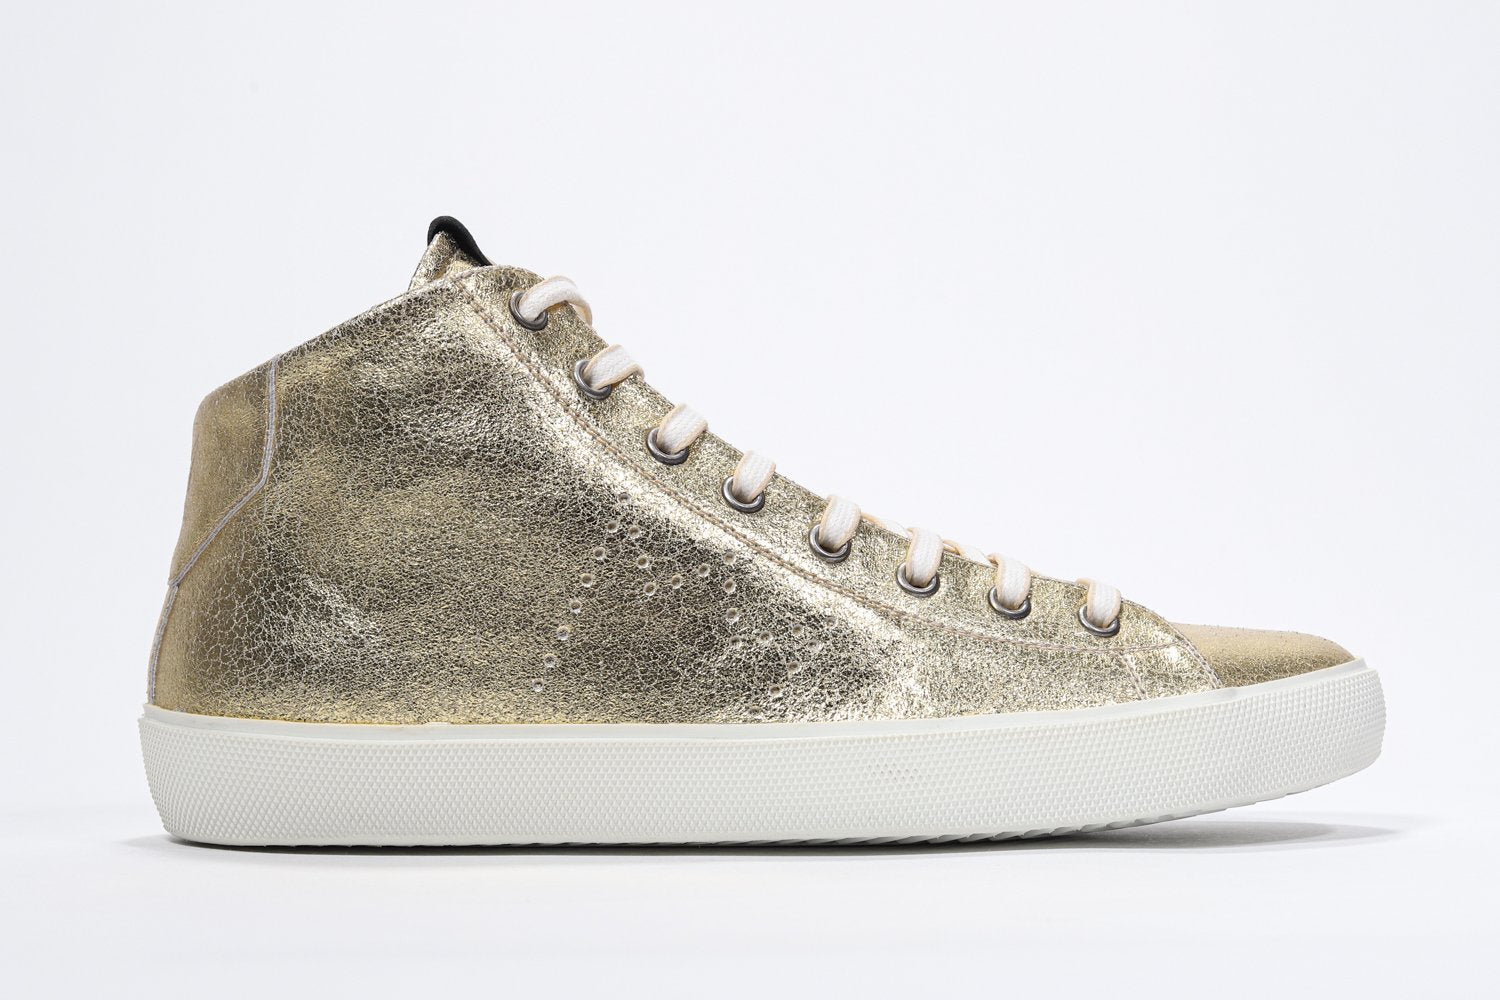 Side profile of mid top gold sneaker with full leather upper with perforated crown logo, internal zip and white sole.